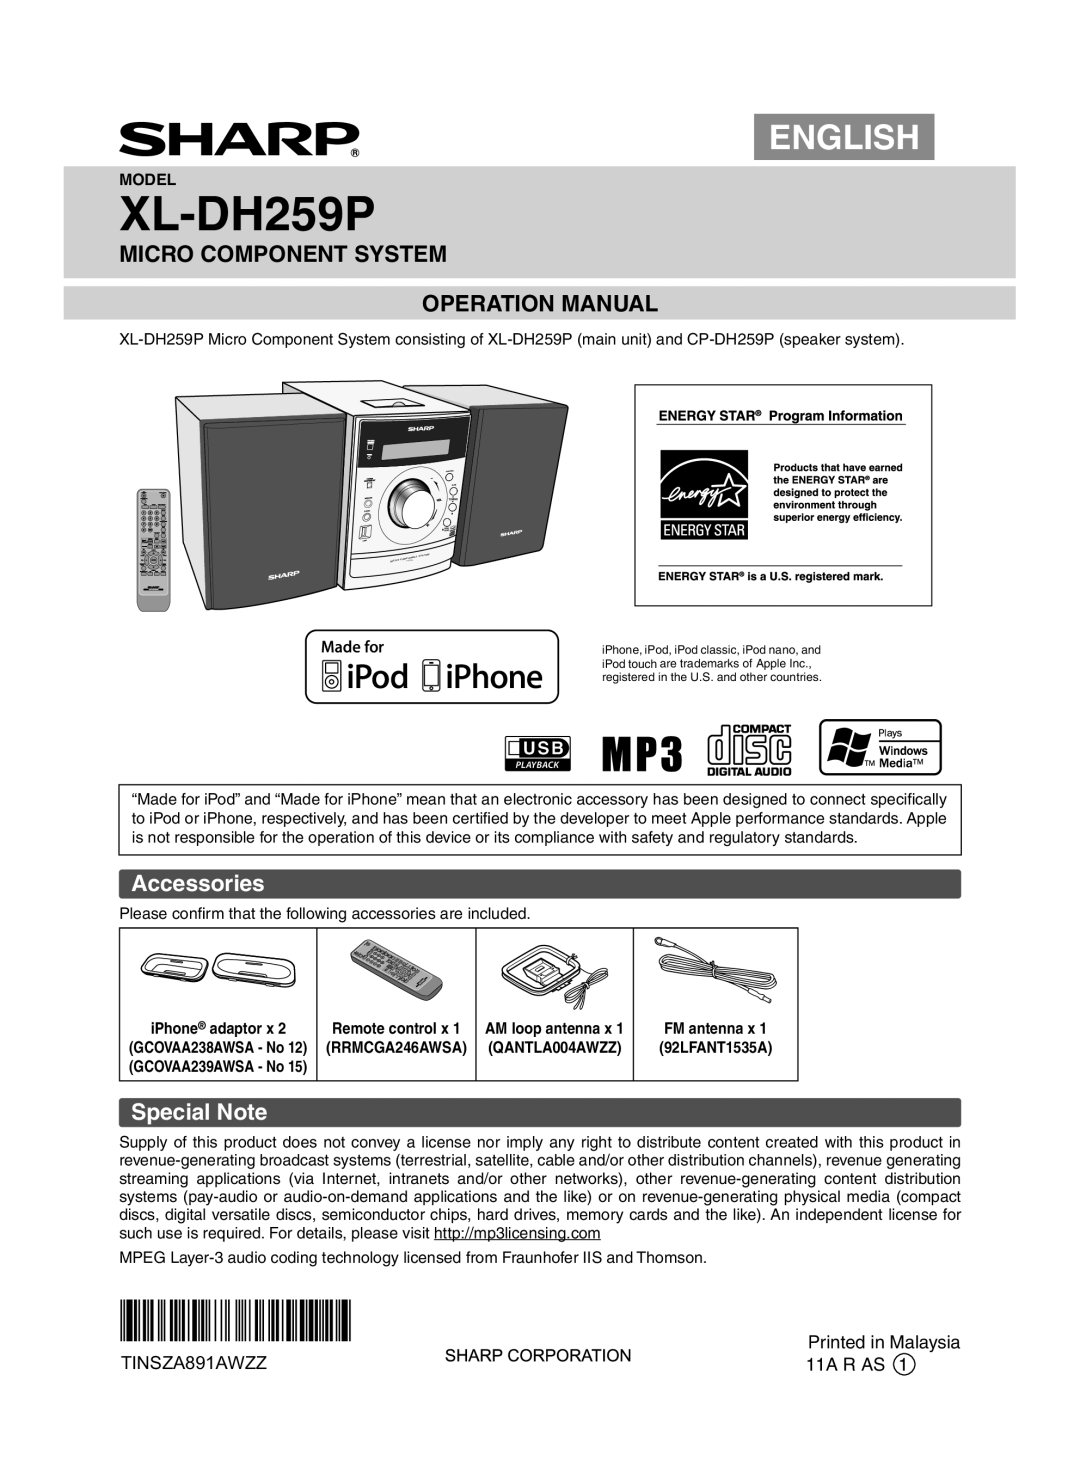 Sharp XLDH259P operation manual Accessories, Special Note, XL-DH259P, English, TINSZA891AWZZ 